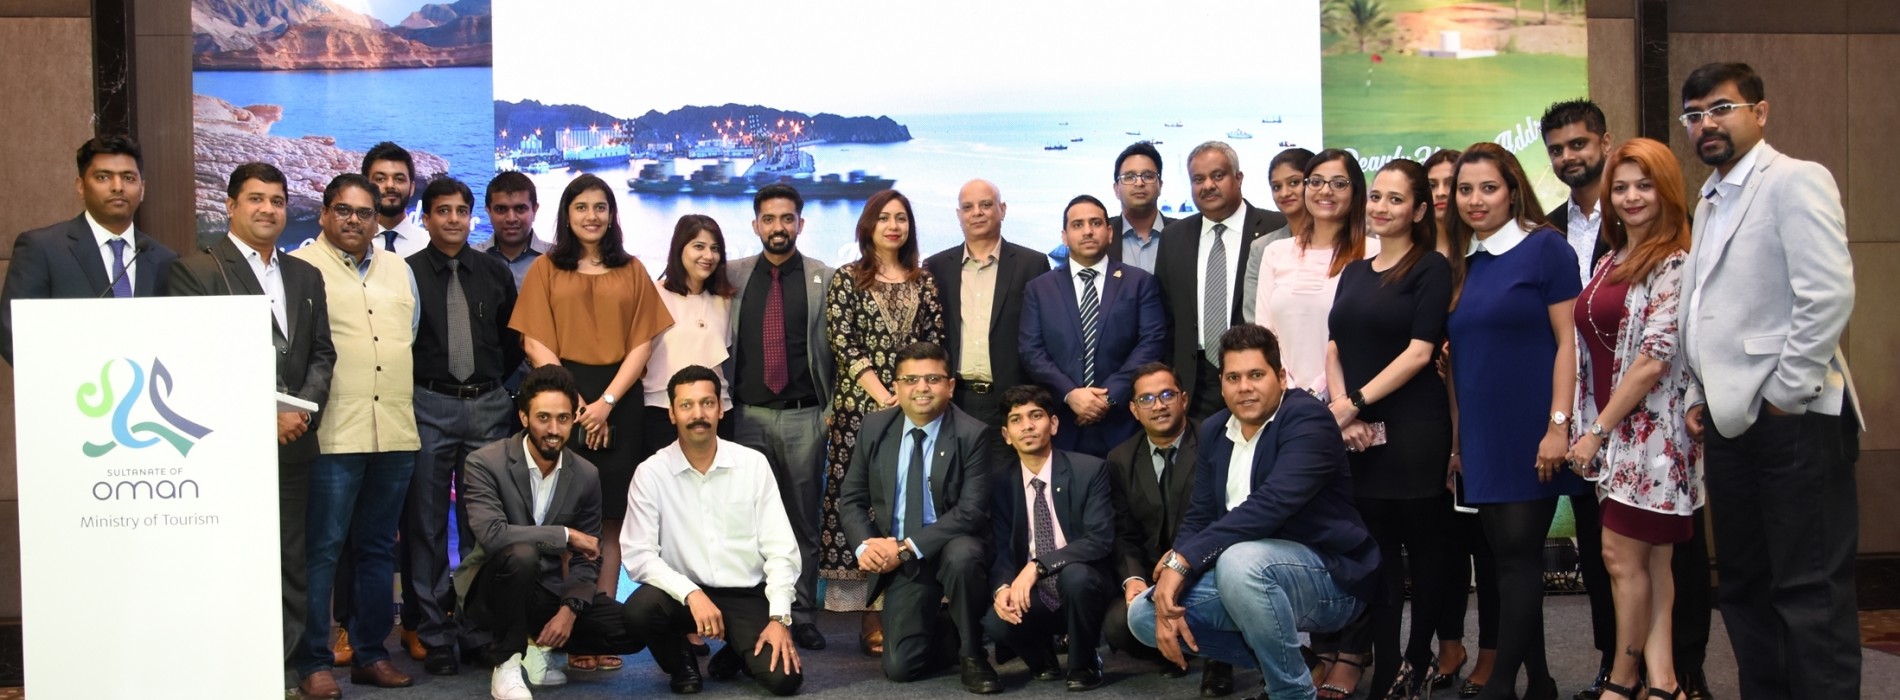 Oman Tourism and Cox & Kings Ltd. hosted networking events in Mumbai and Delhi